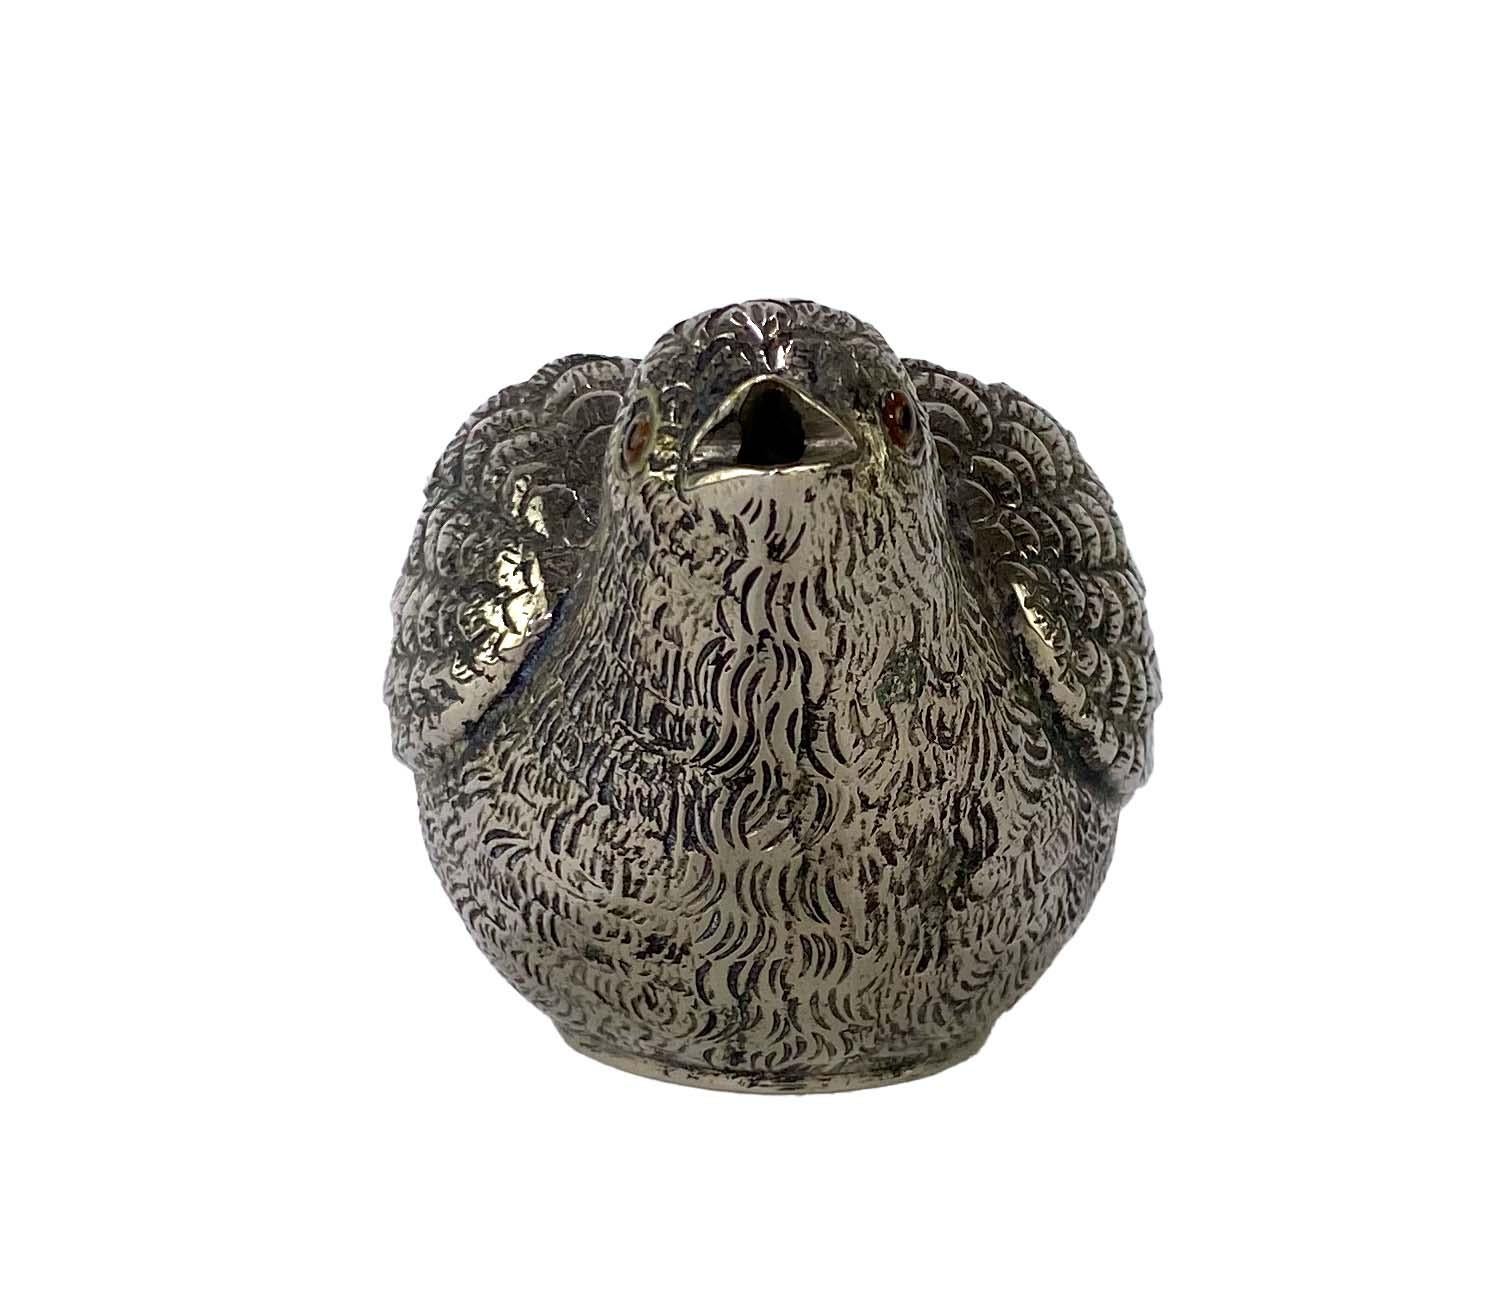 Presenting a miniature votive holder/trinket bowl made by Gucci in the 1970s. In the form of a small sparrow, this piece is made of heavy silver-toned metal and features embellished eyes. This makes a wonderfully unique gift! Check out our page to